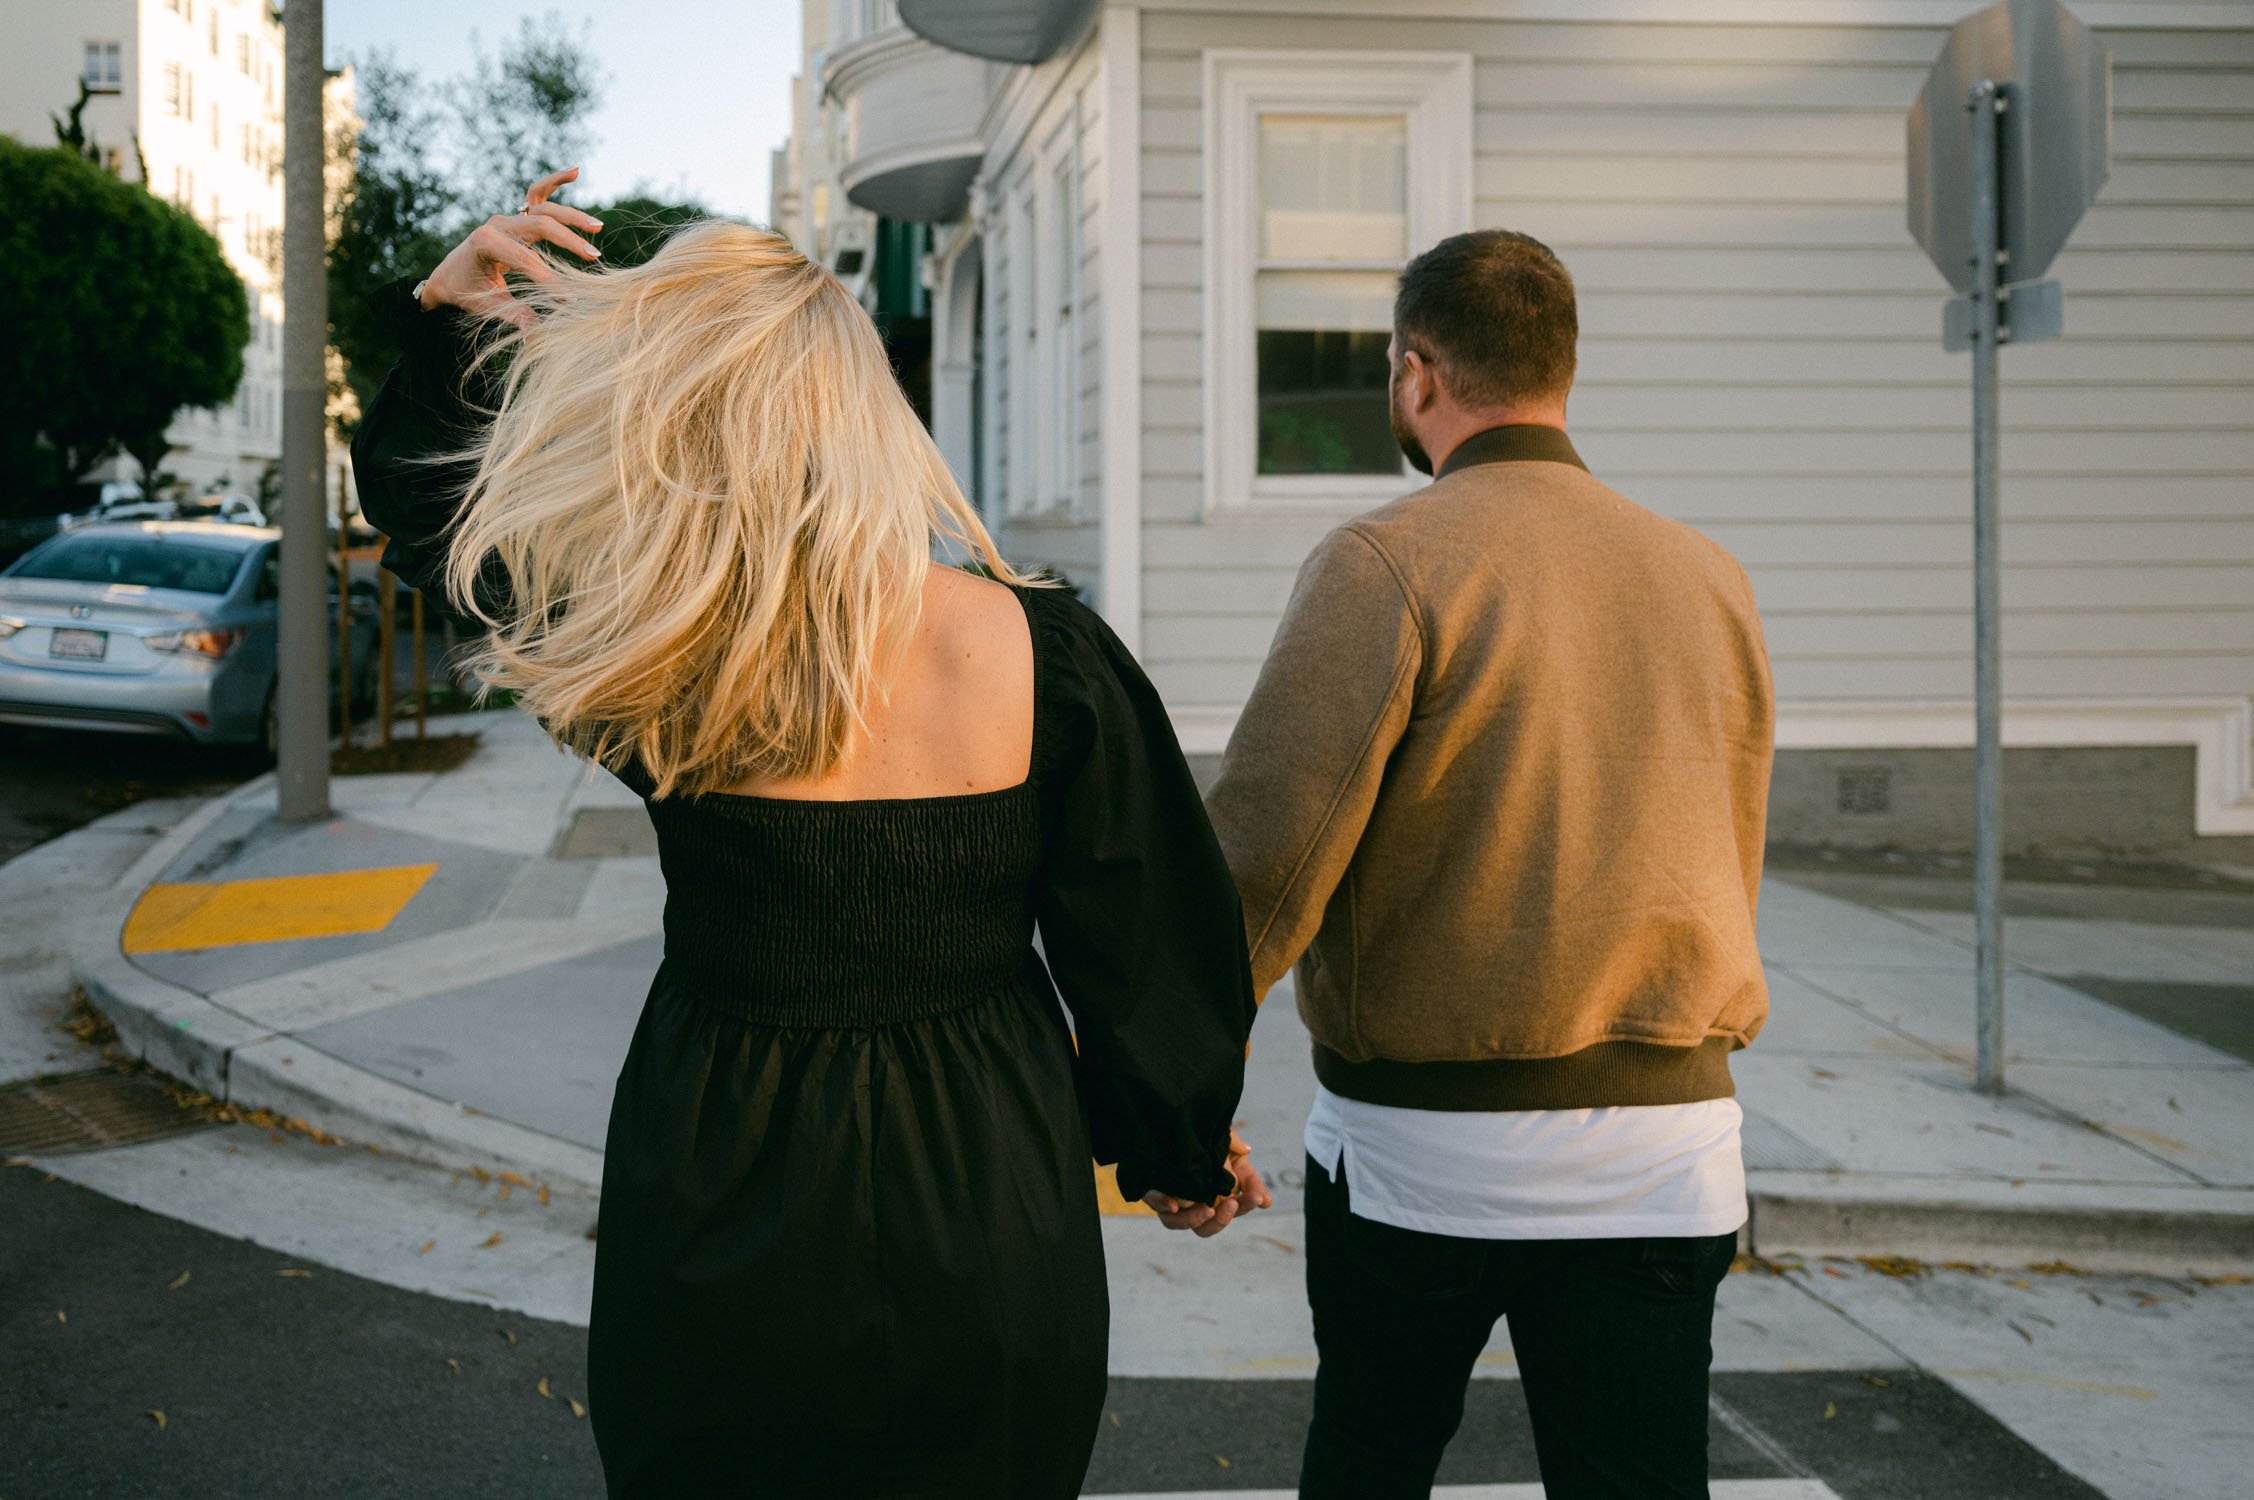 san francisco maternity session, photo of couple holding hands. mom is wearing a black dress with white tennis shoes and dad is wearing a tan jacket